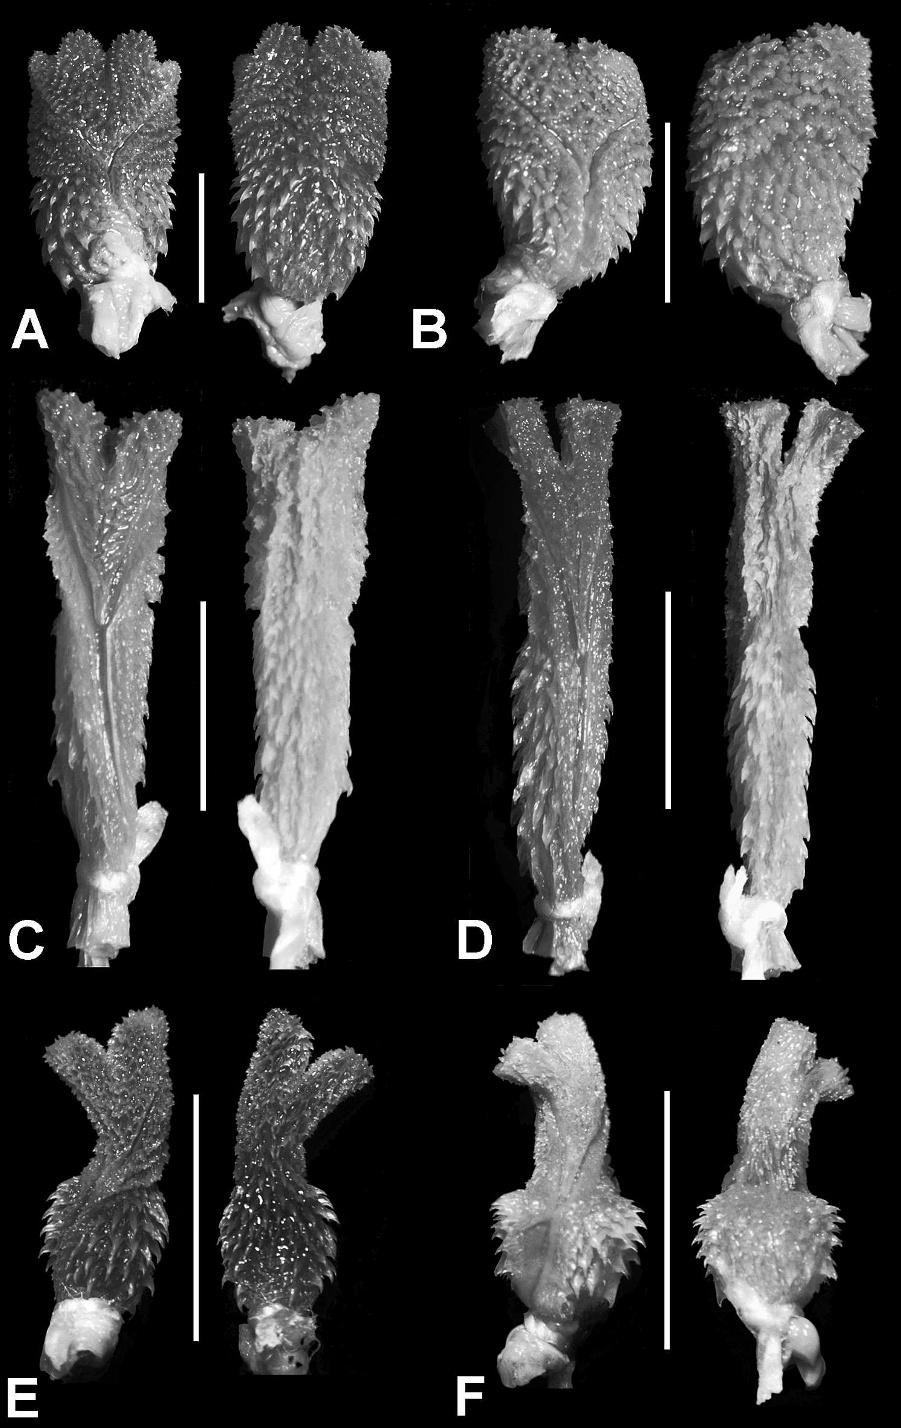 2010] HERPETOLOGICAL MONOGRAPHS 153 FIG. 3. Sulcate (left) and asulcate (right) views of the hemipenis of Atractus apophis sp. nov.